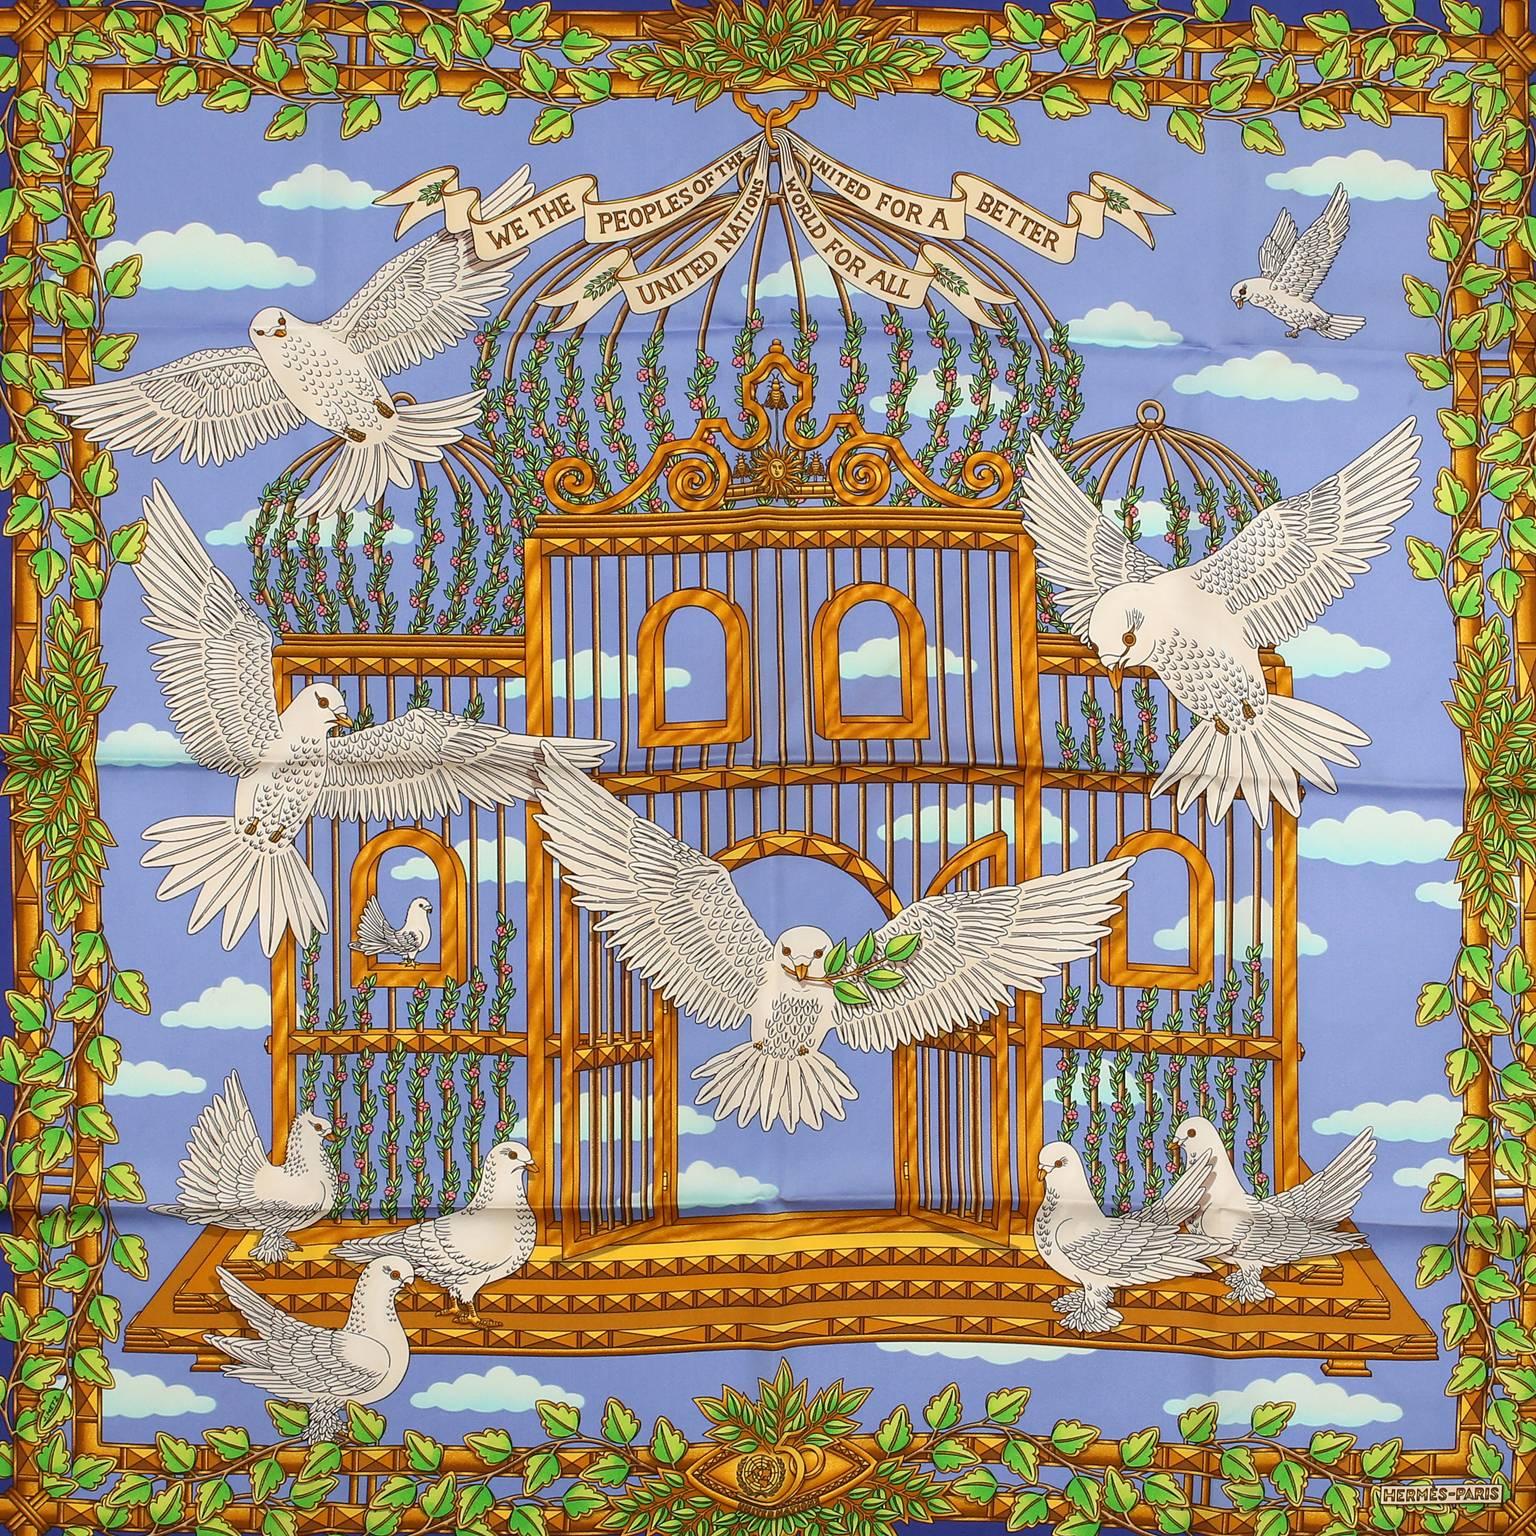 Hermès United Nations 90 cm Silk Scarf - NEW with the original box.
The print features a blue background with a dove release design, symbolizing peace.  The collectible style was created to commemorate the 50th anniversary of the United nations